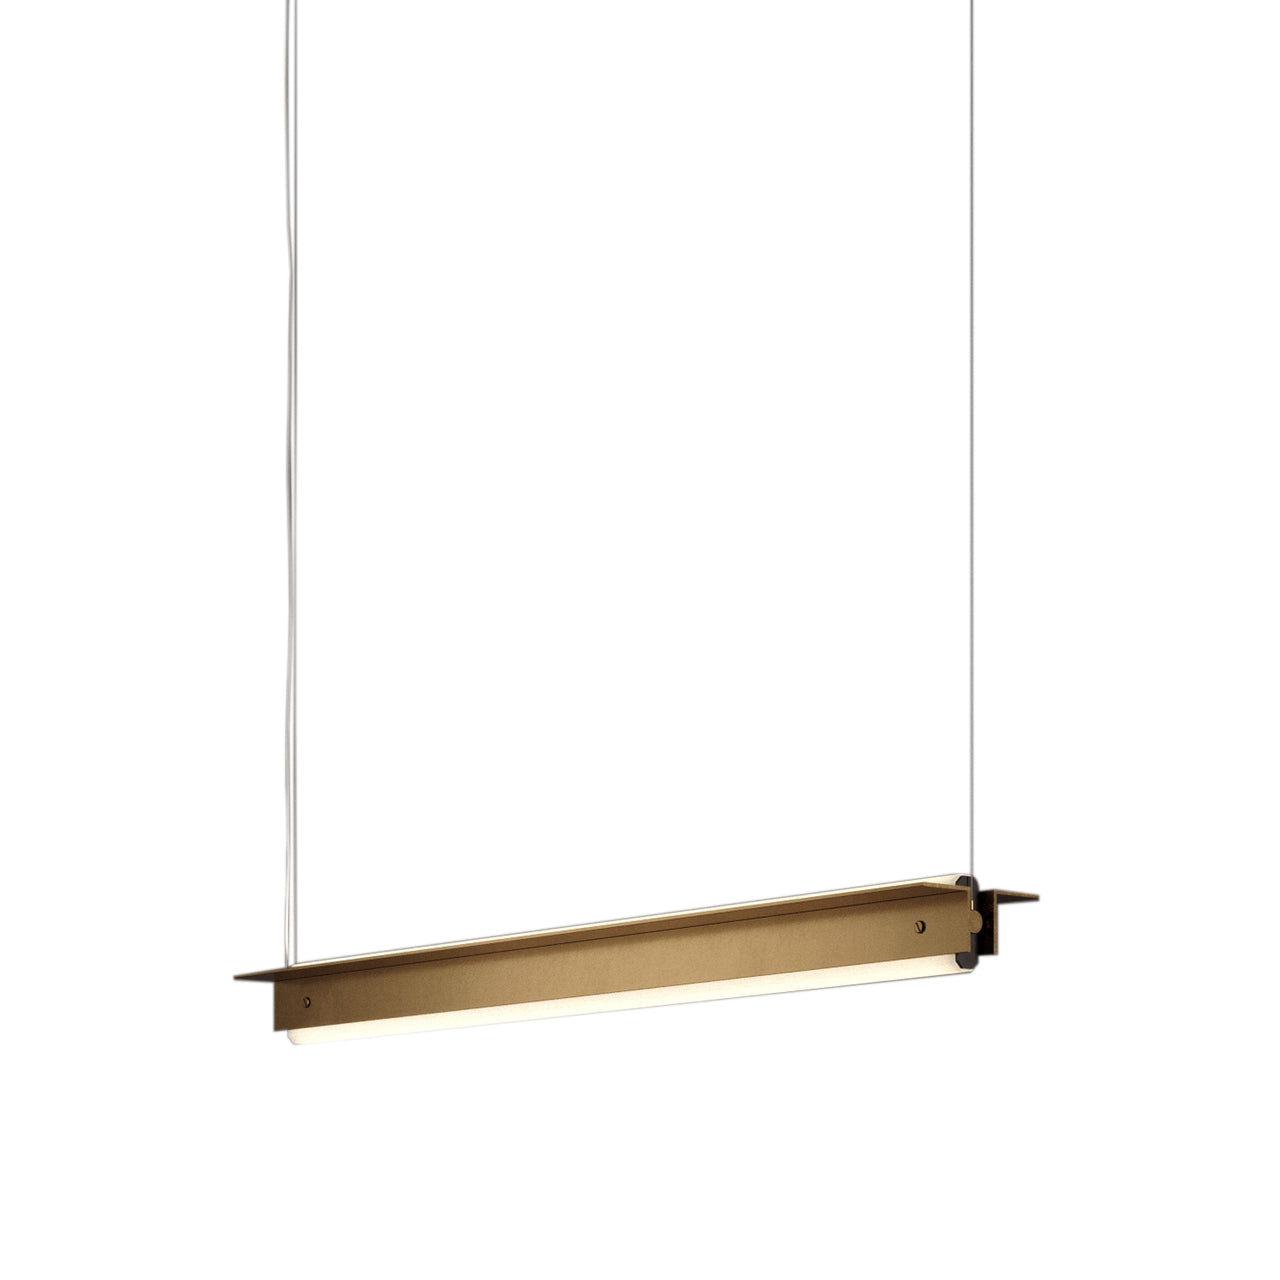 Axis T Suspension Light: Small - 36